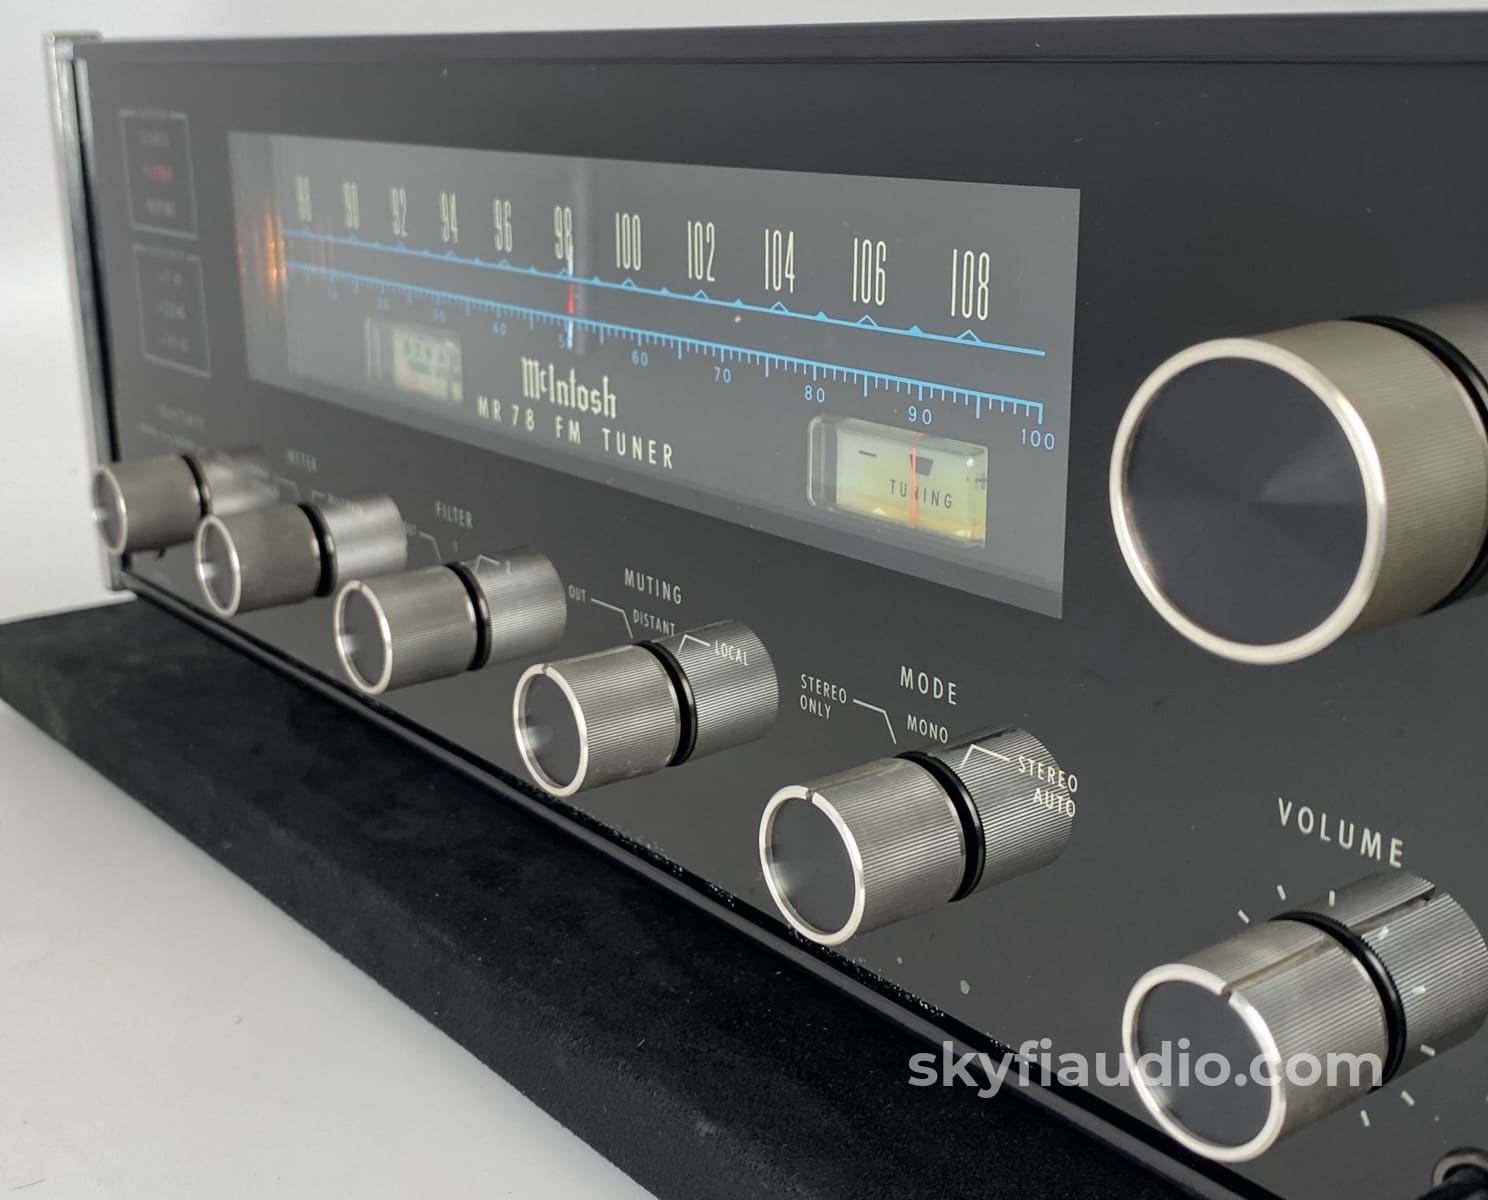 Mcintosh Mr78 Analog Tuner - The Best From